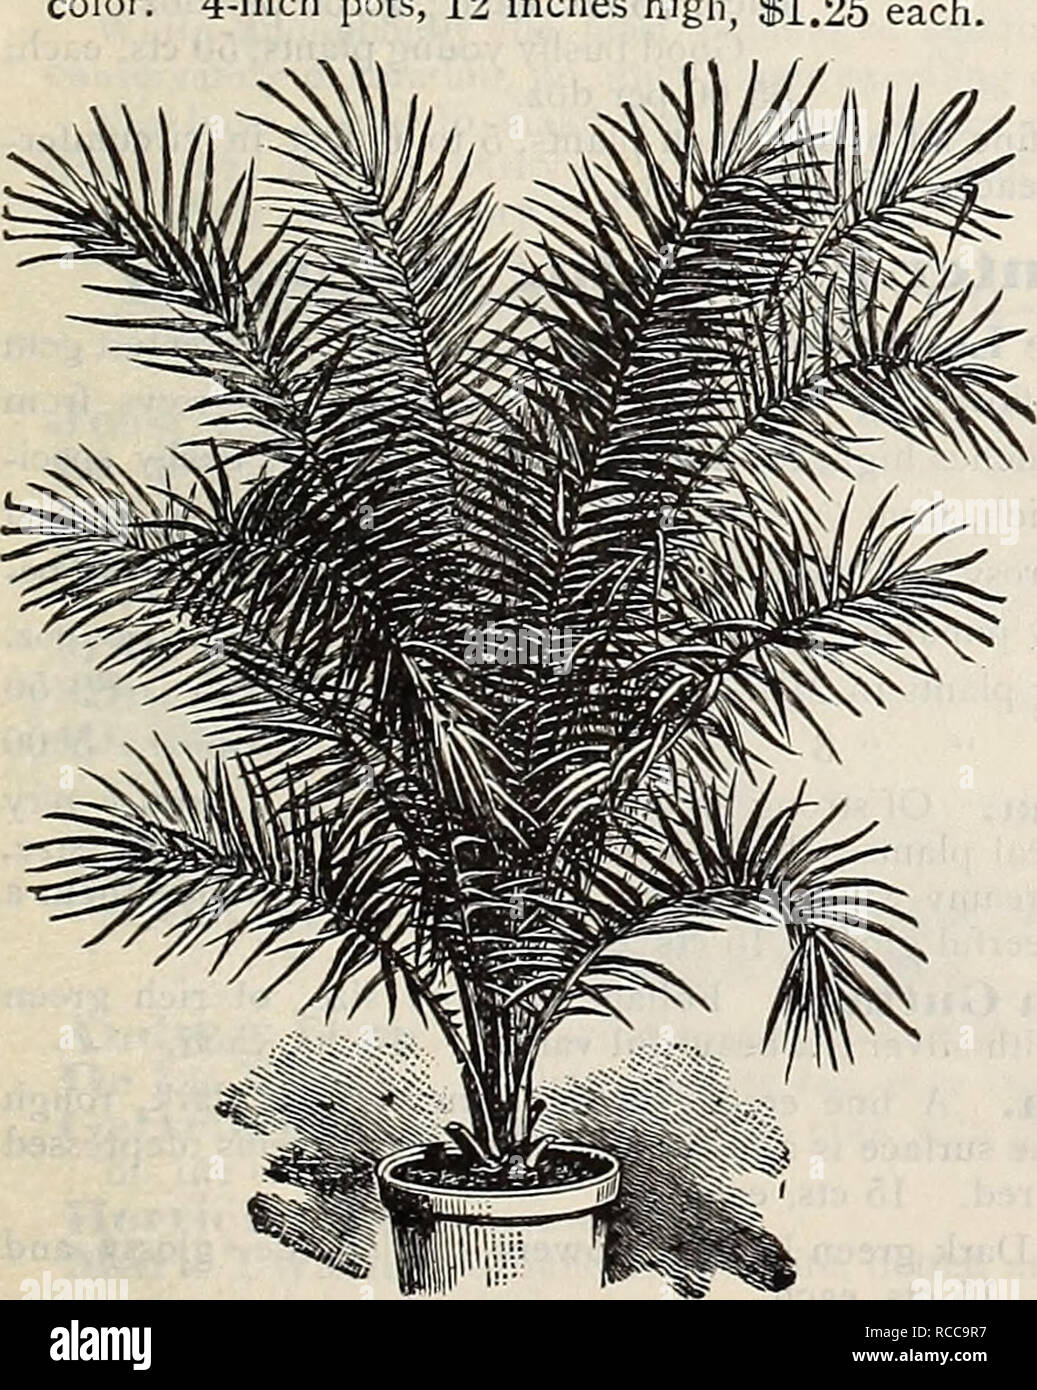 . Dreer's 1900 autumn catalogue of bulbs, plants, seeds, etc. Bulbs (Plants) Catalogs; Flowers Seeds Catalogs; Gardening Equipment and supplies Catalogs; Nurseries (Horticulture) Catalogs; Fruit Seeds Catalogs. Kentia Belmoreana. JLatauiaBorbonica. Chinese Fan Palm. This popular variety is too well known to require description. (See cut.) 10 00 15 00 Puts LEAVES. HEIGHT. EACH. 3-inch 4 to 5 12 ncbes. §0 25 4 &quot; 5 to 6 15 50 5 &quot; 0 15 1 00 6 &quot; 6 20 1 50 7 &quot; 6 to 7 24 2 50 8. &quot; 7 to 8 30 5 00. PnOiNix Reclinata. Latania Borbonica. Identical with the popular Chinese Fan Pal Stock Photo